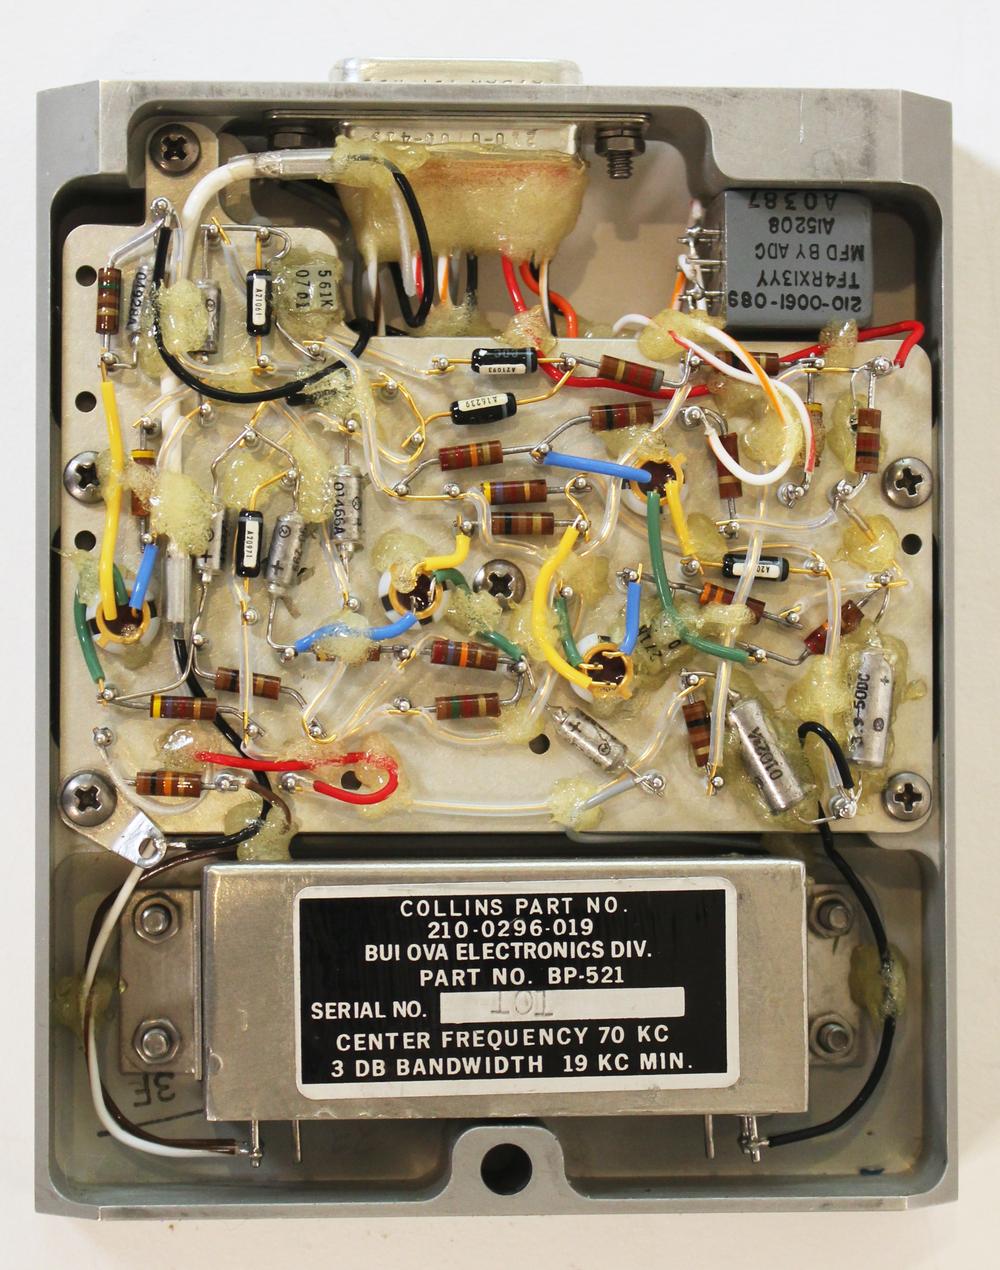 The data detector module. It contains a 70-kilohertz bandpass filter produced by Bulova.